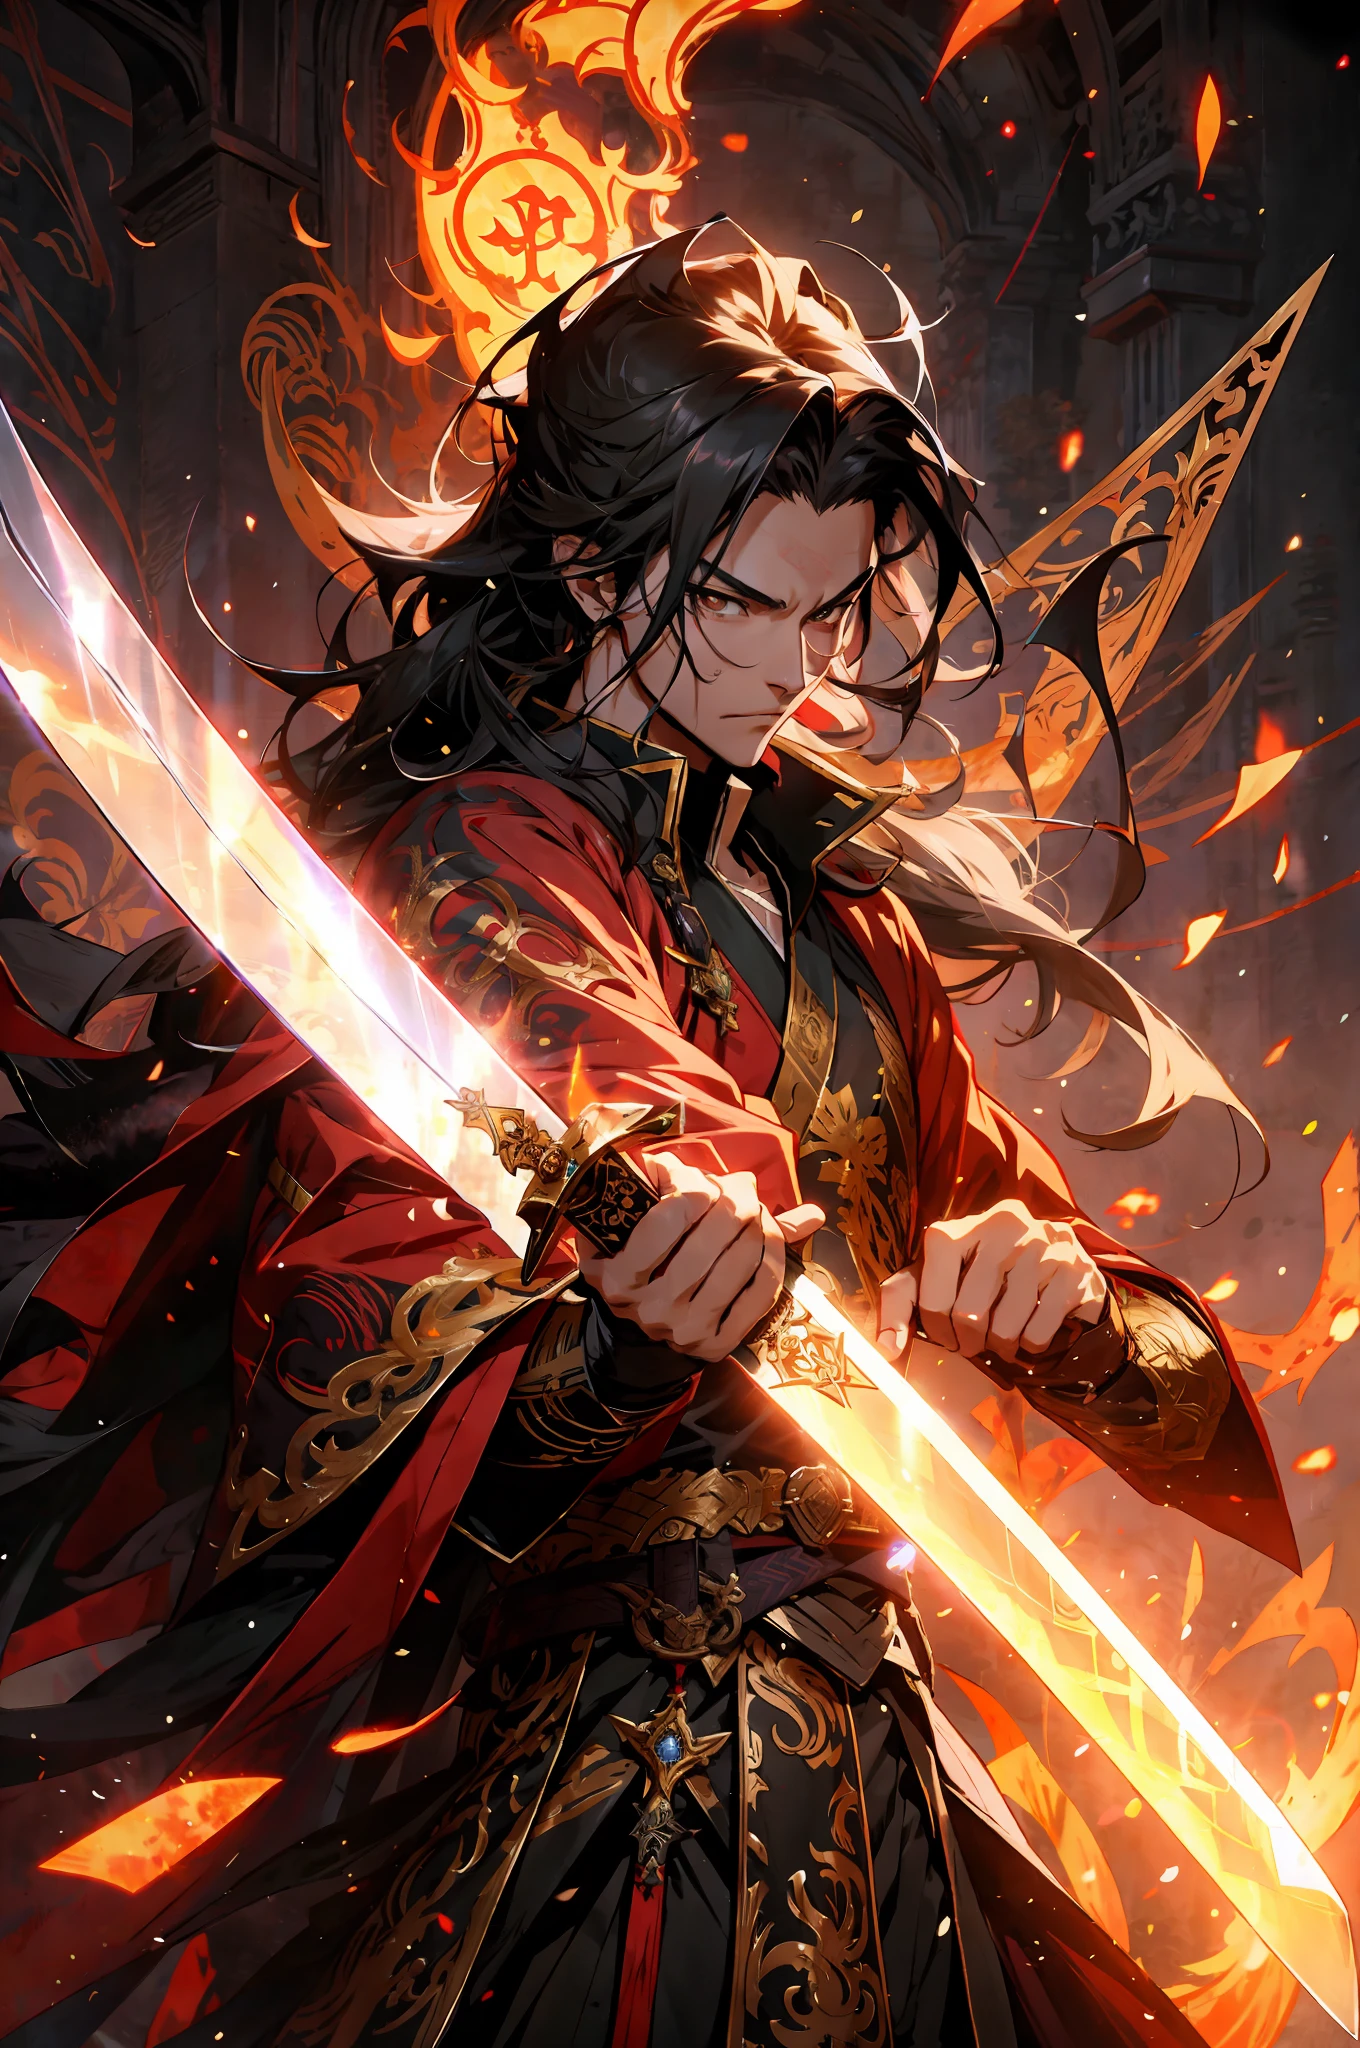 anime - style image of a man holding a sword in front of a sky, handsome guy in demon slayer art, by Yang J, with large sword, demon slayer artstyle, badass anime 8 k, epic fantasy digital art style, keqing from genshin impact, 2. 5 d cgi anime fantasy artwork, demon slayer rui fanart, detailed digital anime art